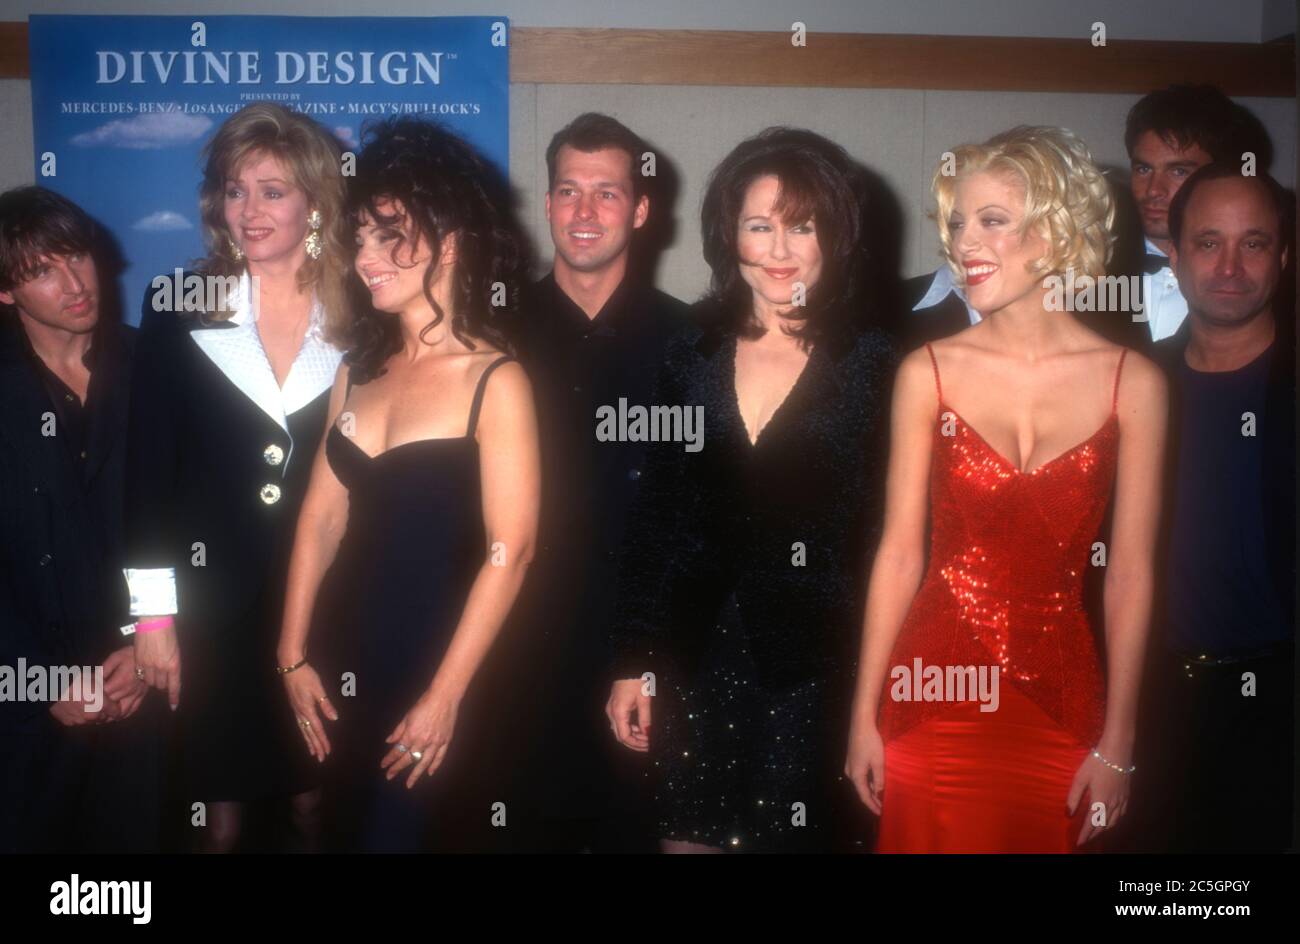 West Hollywood, California, USA 3rd December 1995 Designer Todd Oldham,  actress Jean Smart, actress Fran Drescher, guest, actress Mary McDonnell  and actress Tori Spelling attend 5th Annual Divine Design on December 3,